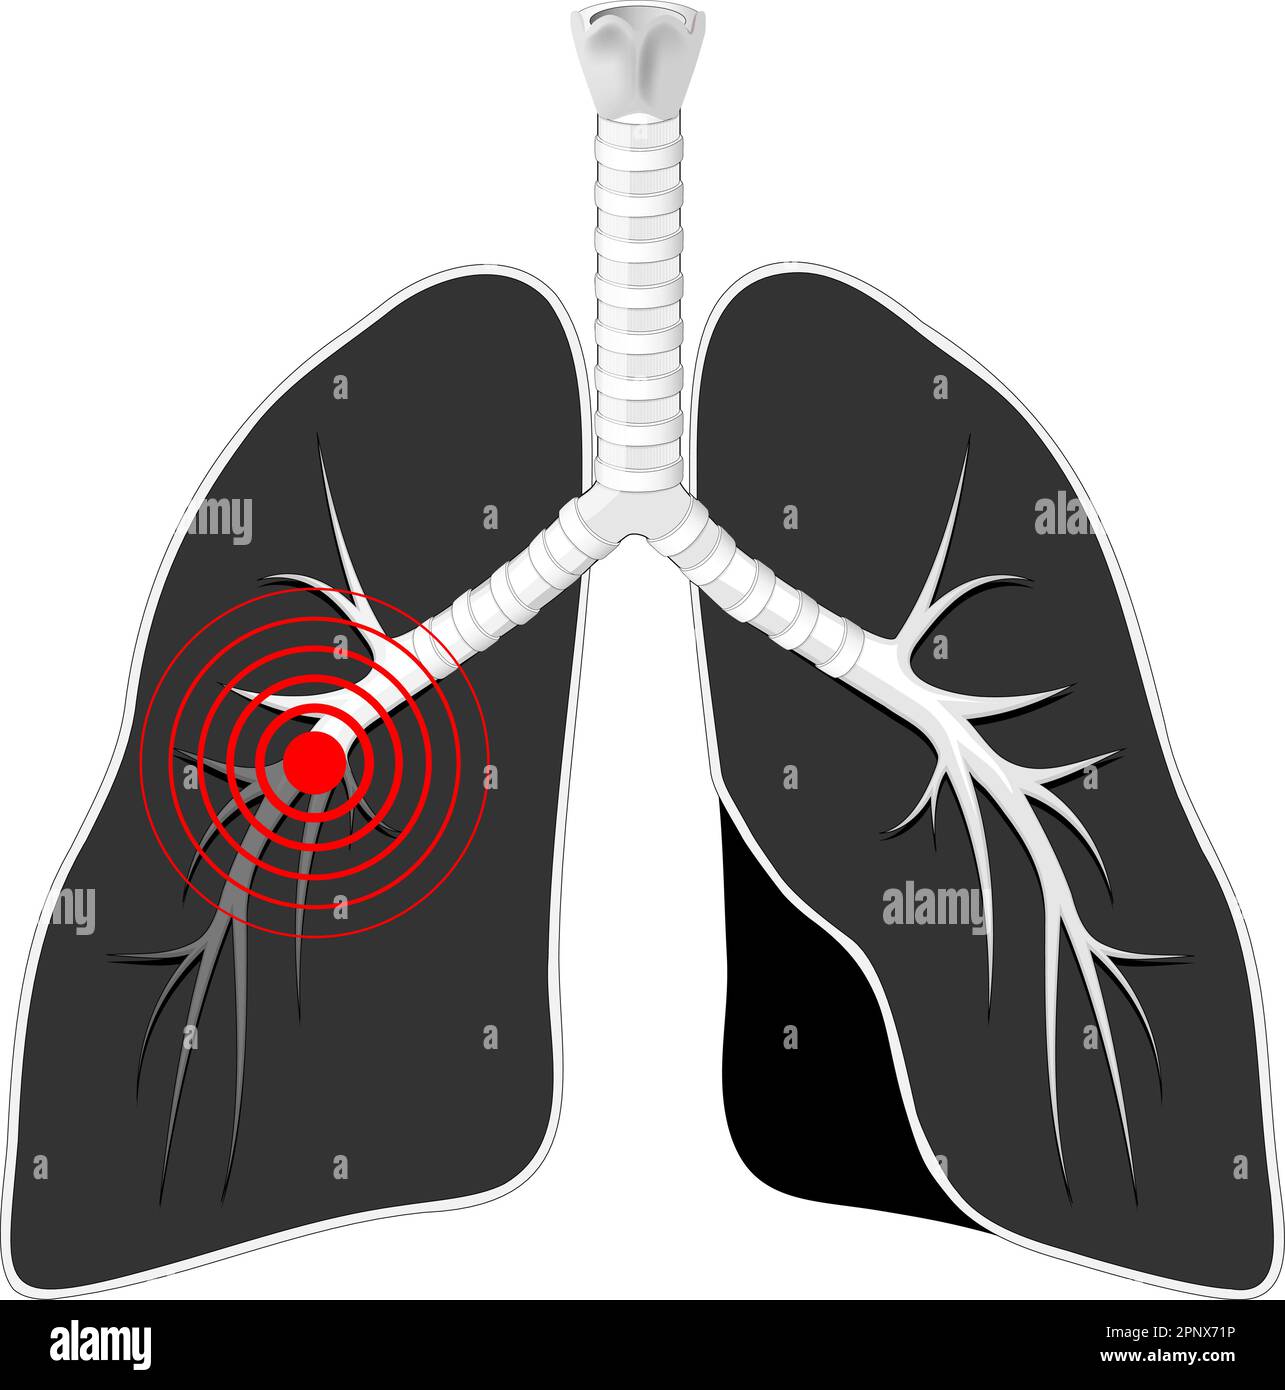 Lungs disease. Black lungs with bronchi and red mark on white background. Human Respiratory system. Vector illustration Stock Vector